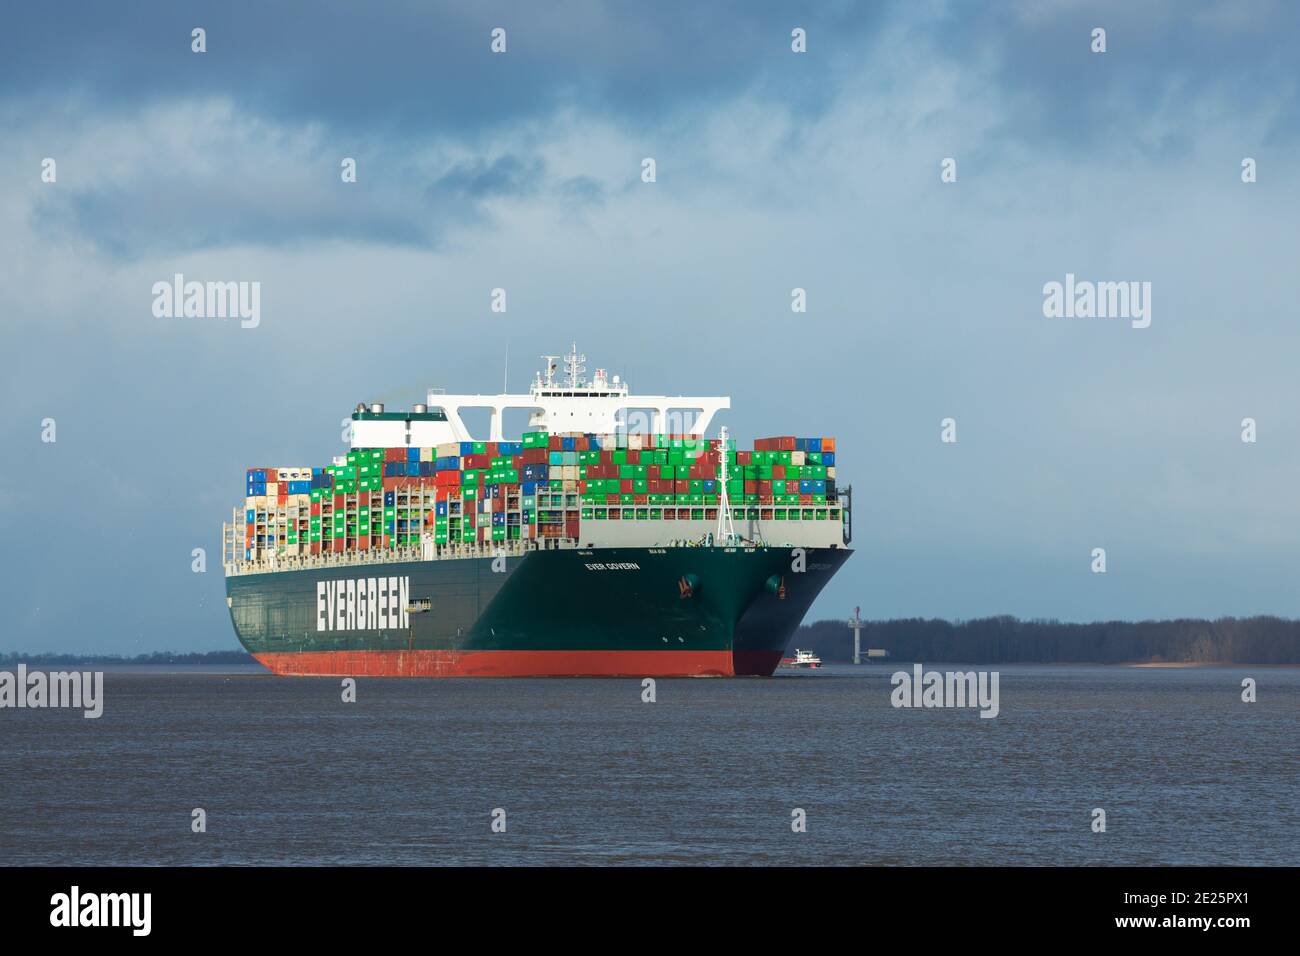 Stade, Germany - January 12, 2021: Container ship EVER GOVERN on Elbe river heading to Hamburg. The vessel is operated by EVERGREEN Marine and sails u Stock Photo